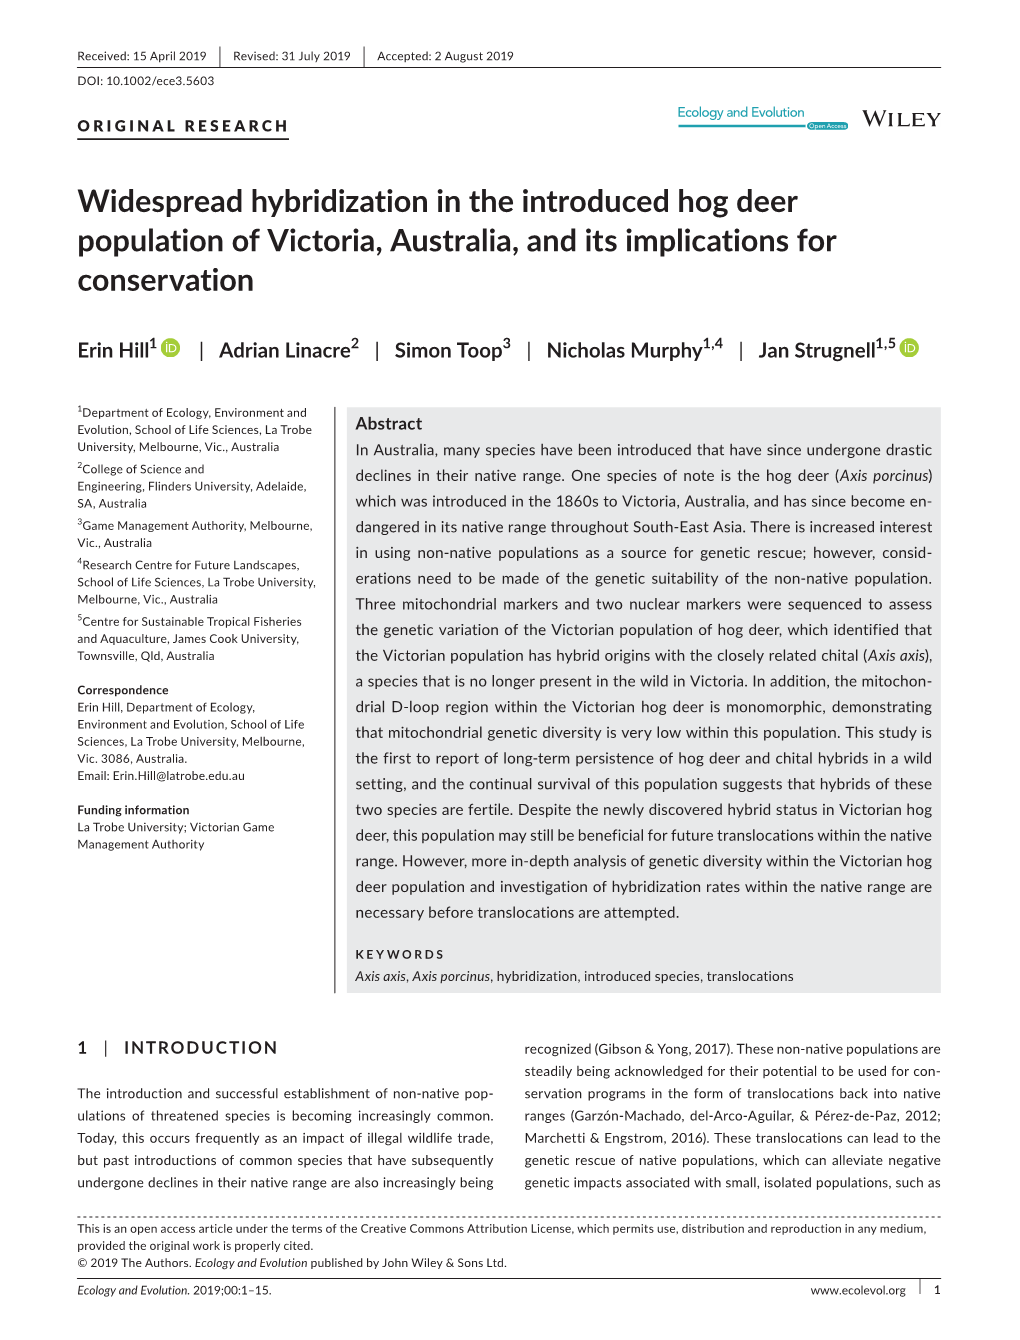 Widespread Hybridization in the Introduced Hog Deer Population of Victoria, Australia, and Its Implications for Conservation